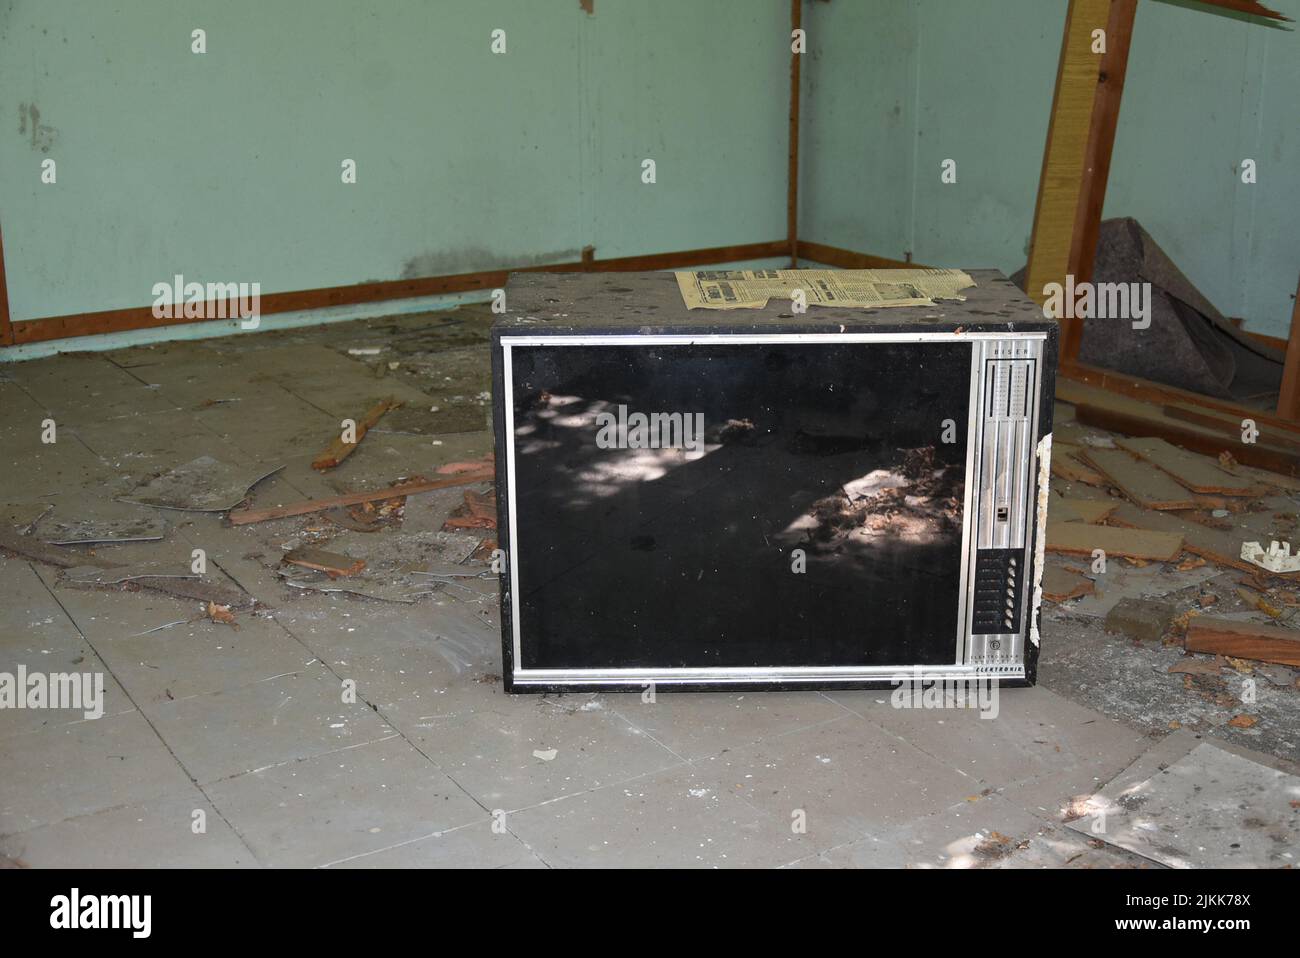 Old TV set in abandoned building Stock Photo